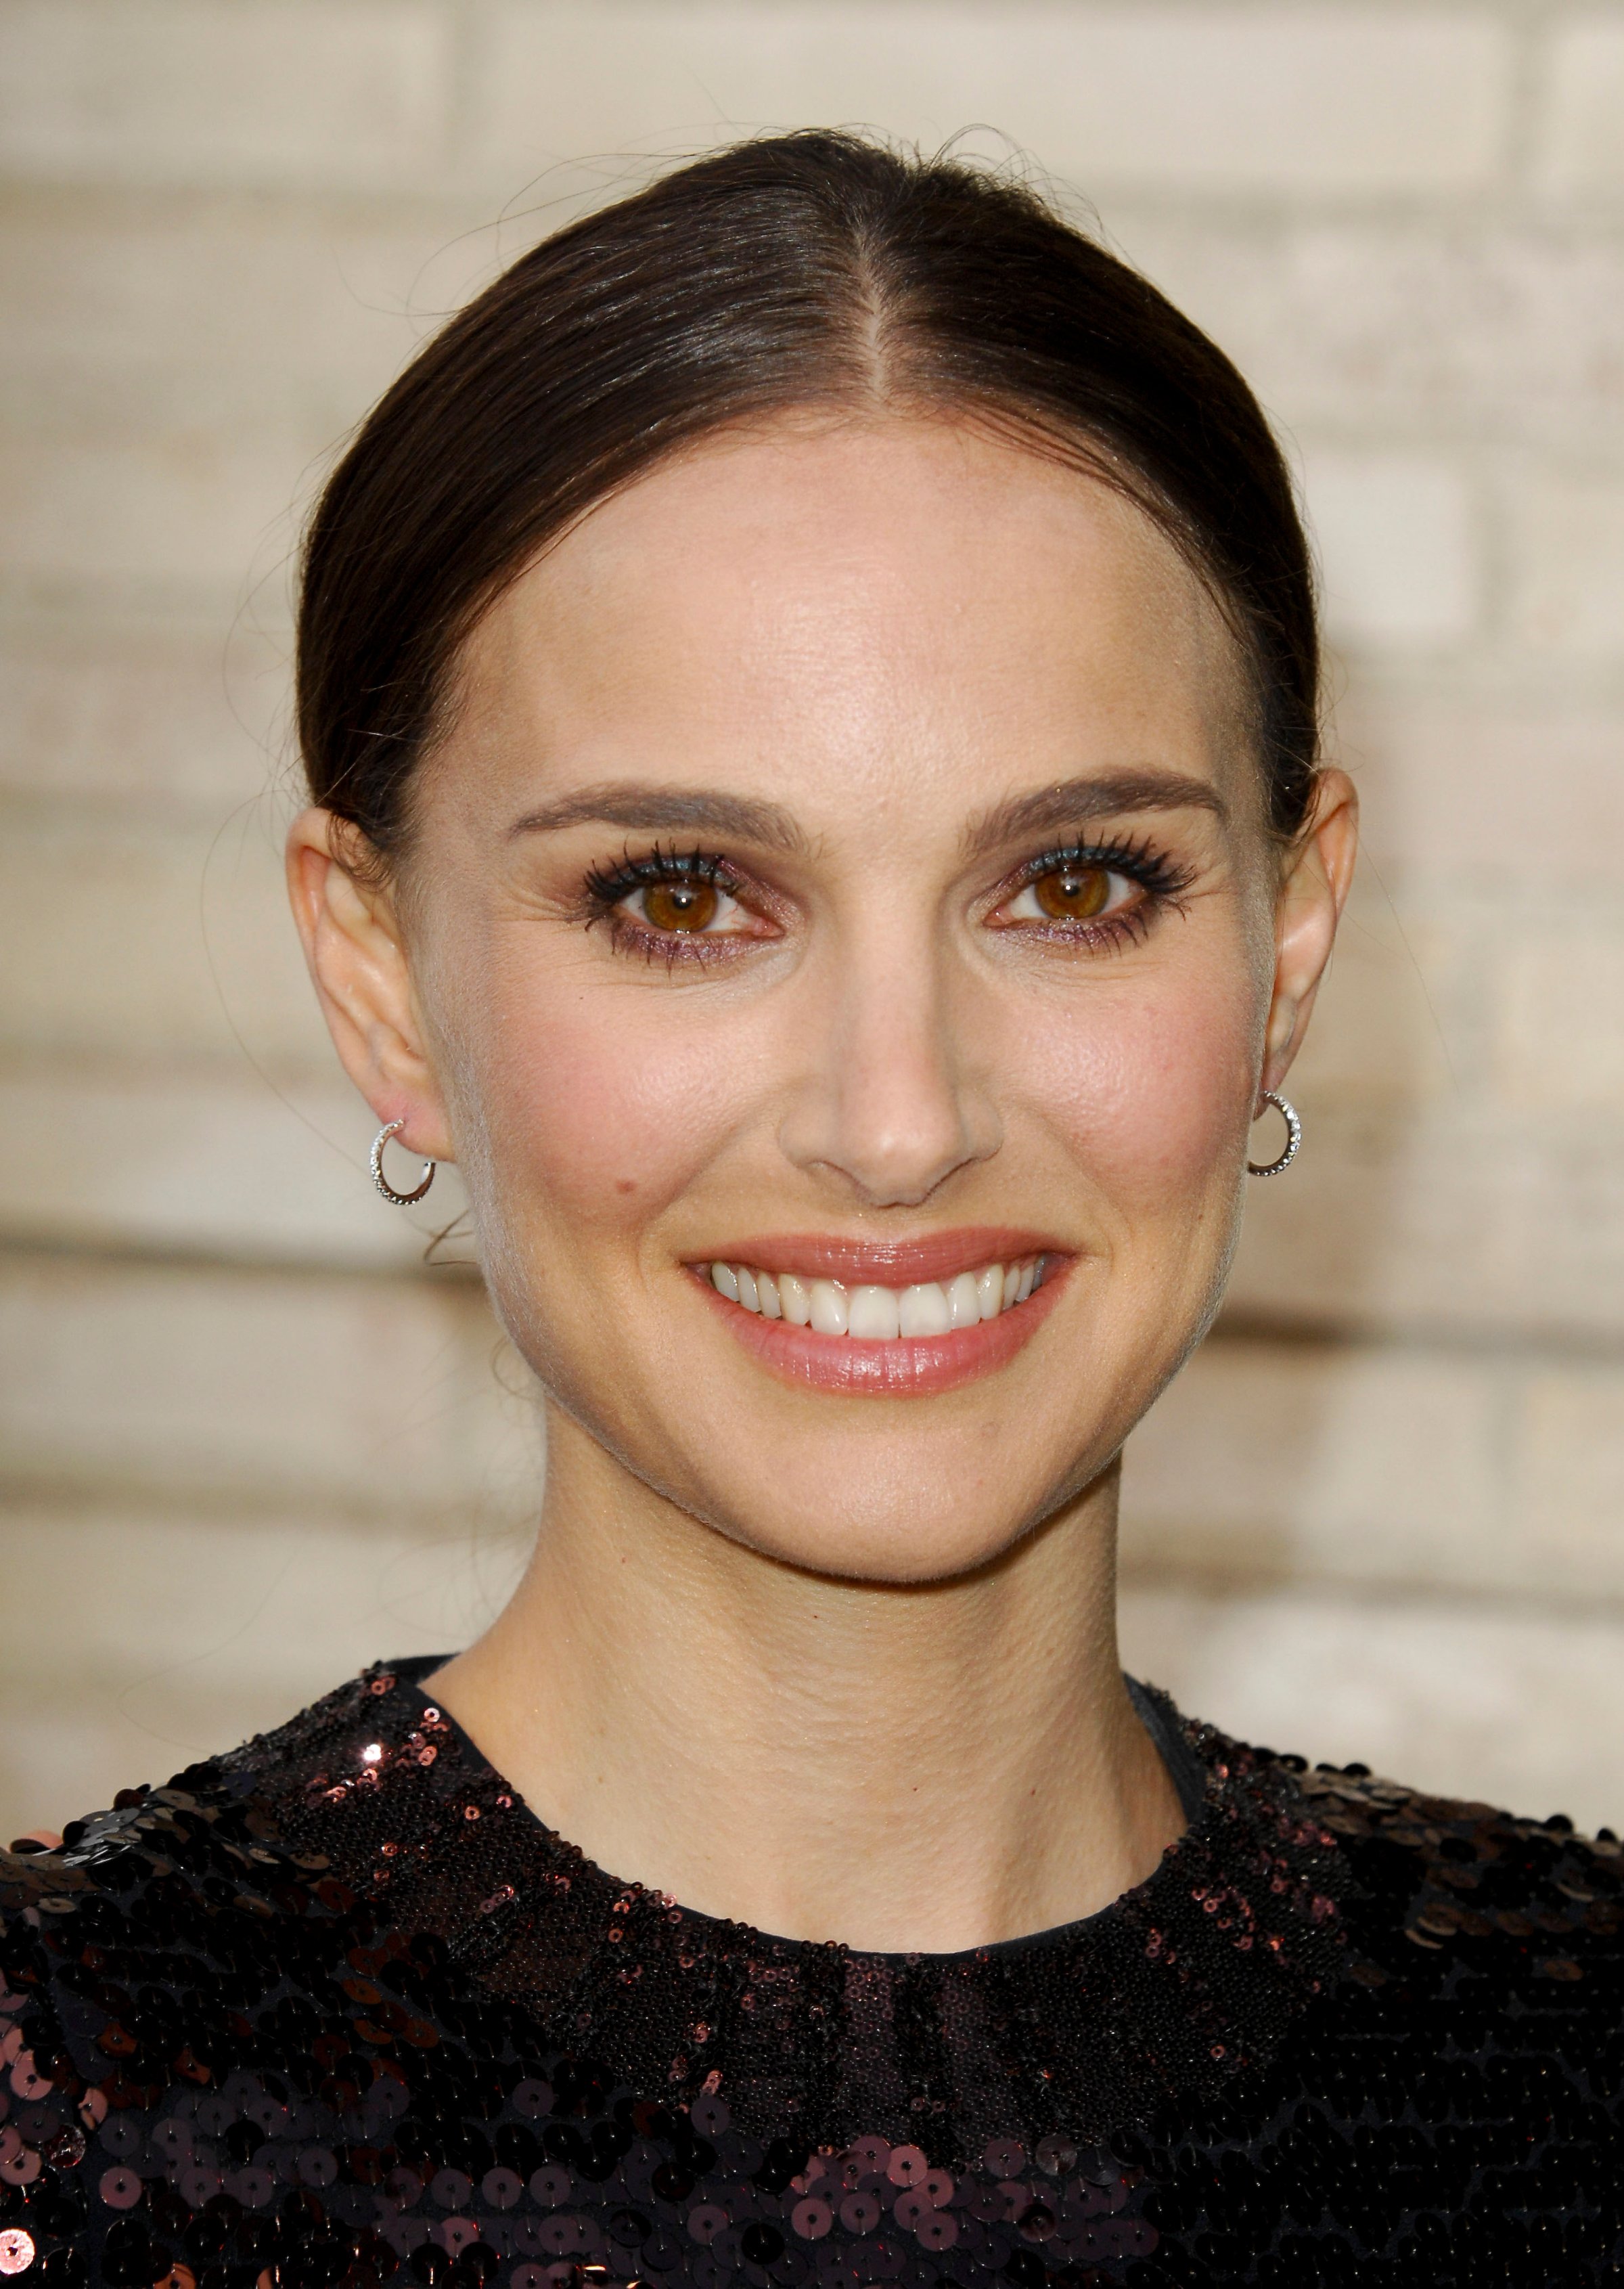 Natalie Portman arrives at the UCLA Younes Soraya Nazarian Center for Israel Studies 5th Annual Gala held at Wallis Annenberg Center for the Performing Arts on May 5, 2015 in Beverly Hills, Calif.